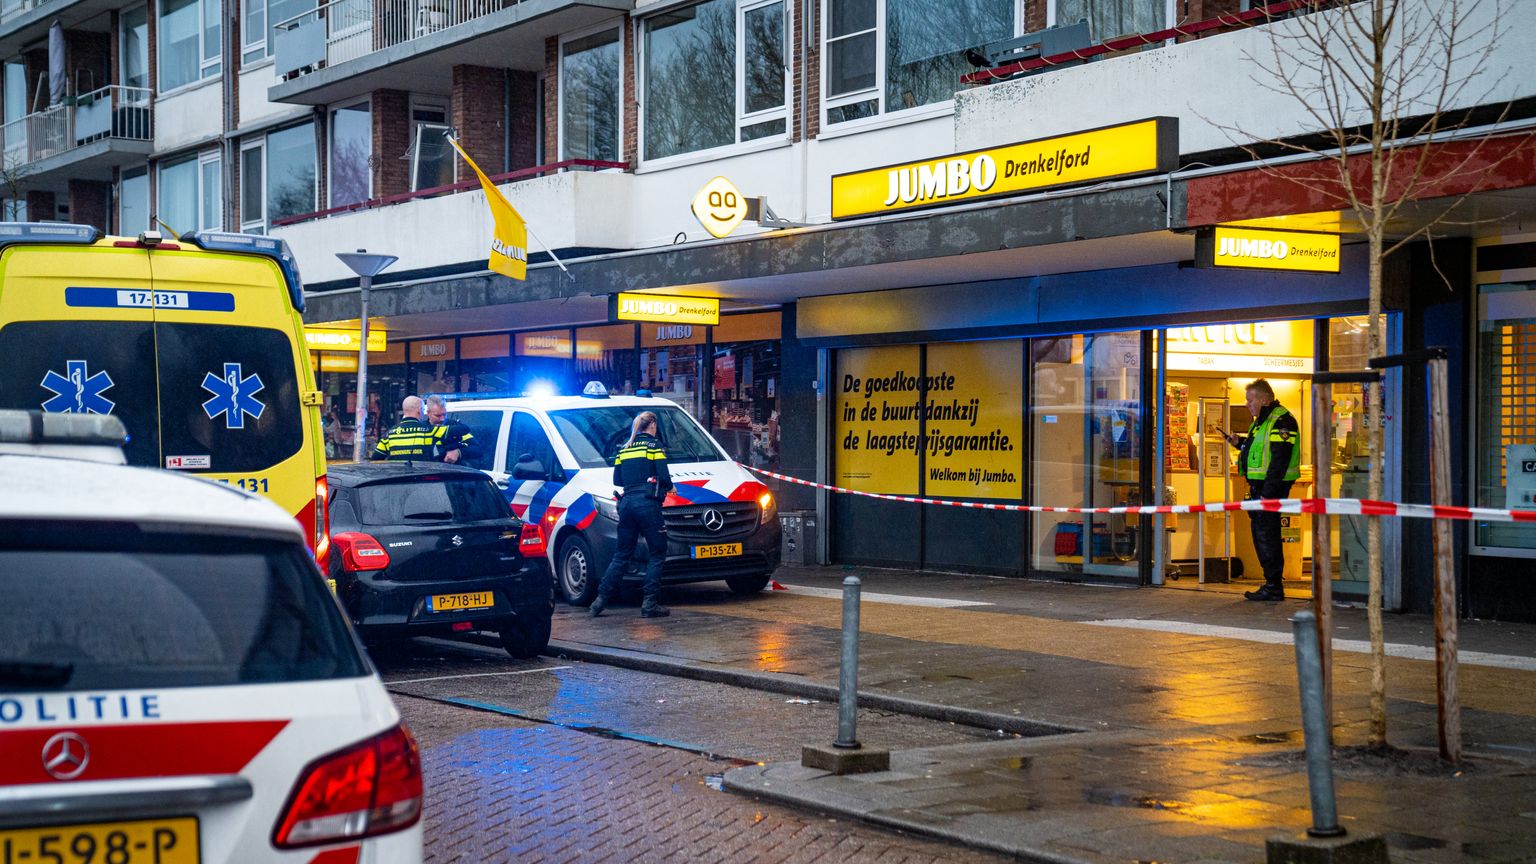 A shop worker in Rotterdam Netherlands was seriously injured in the robbery